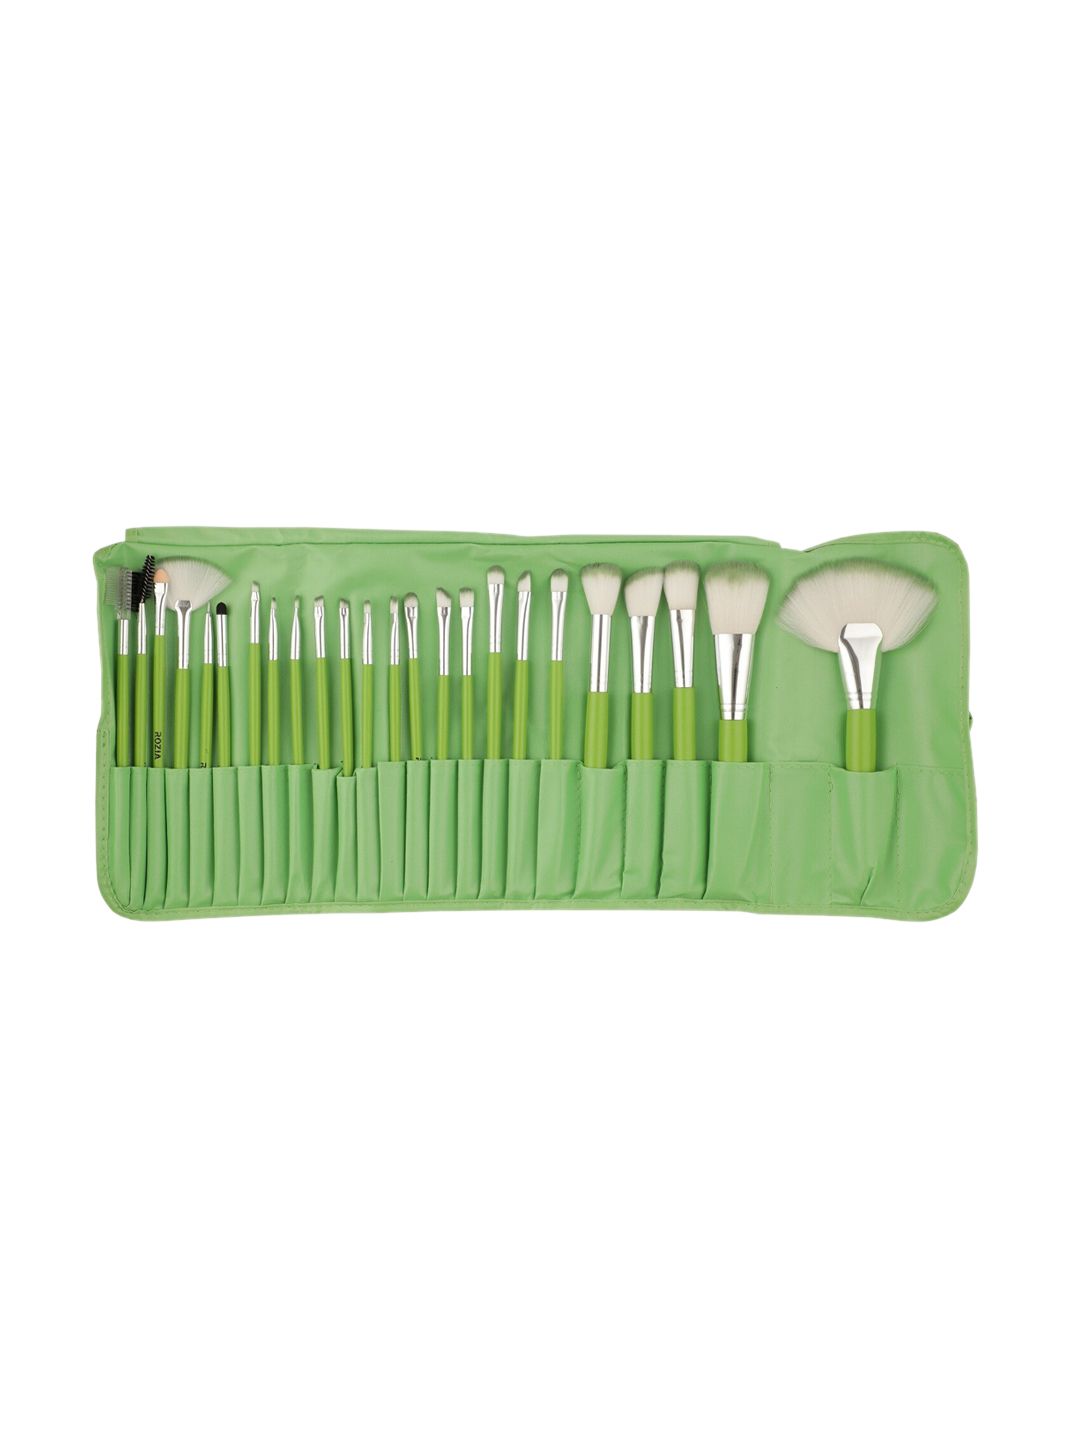 Rozia Makeup Brushes - Set of 24 - Neon Green Price in India